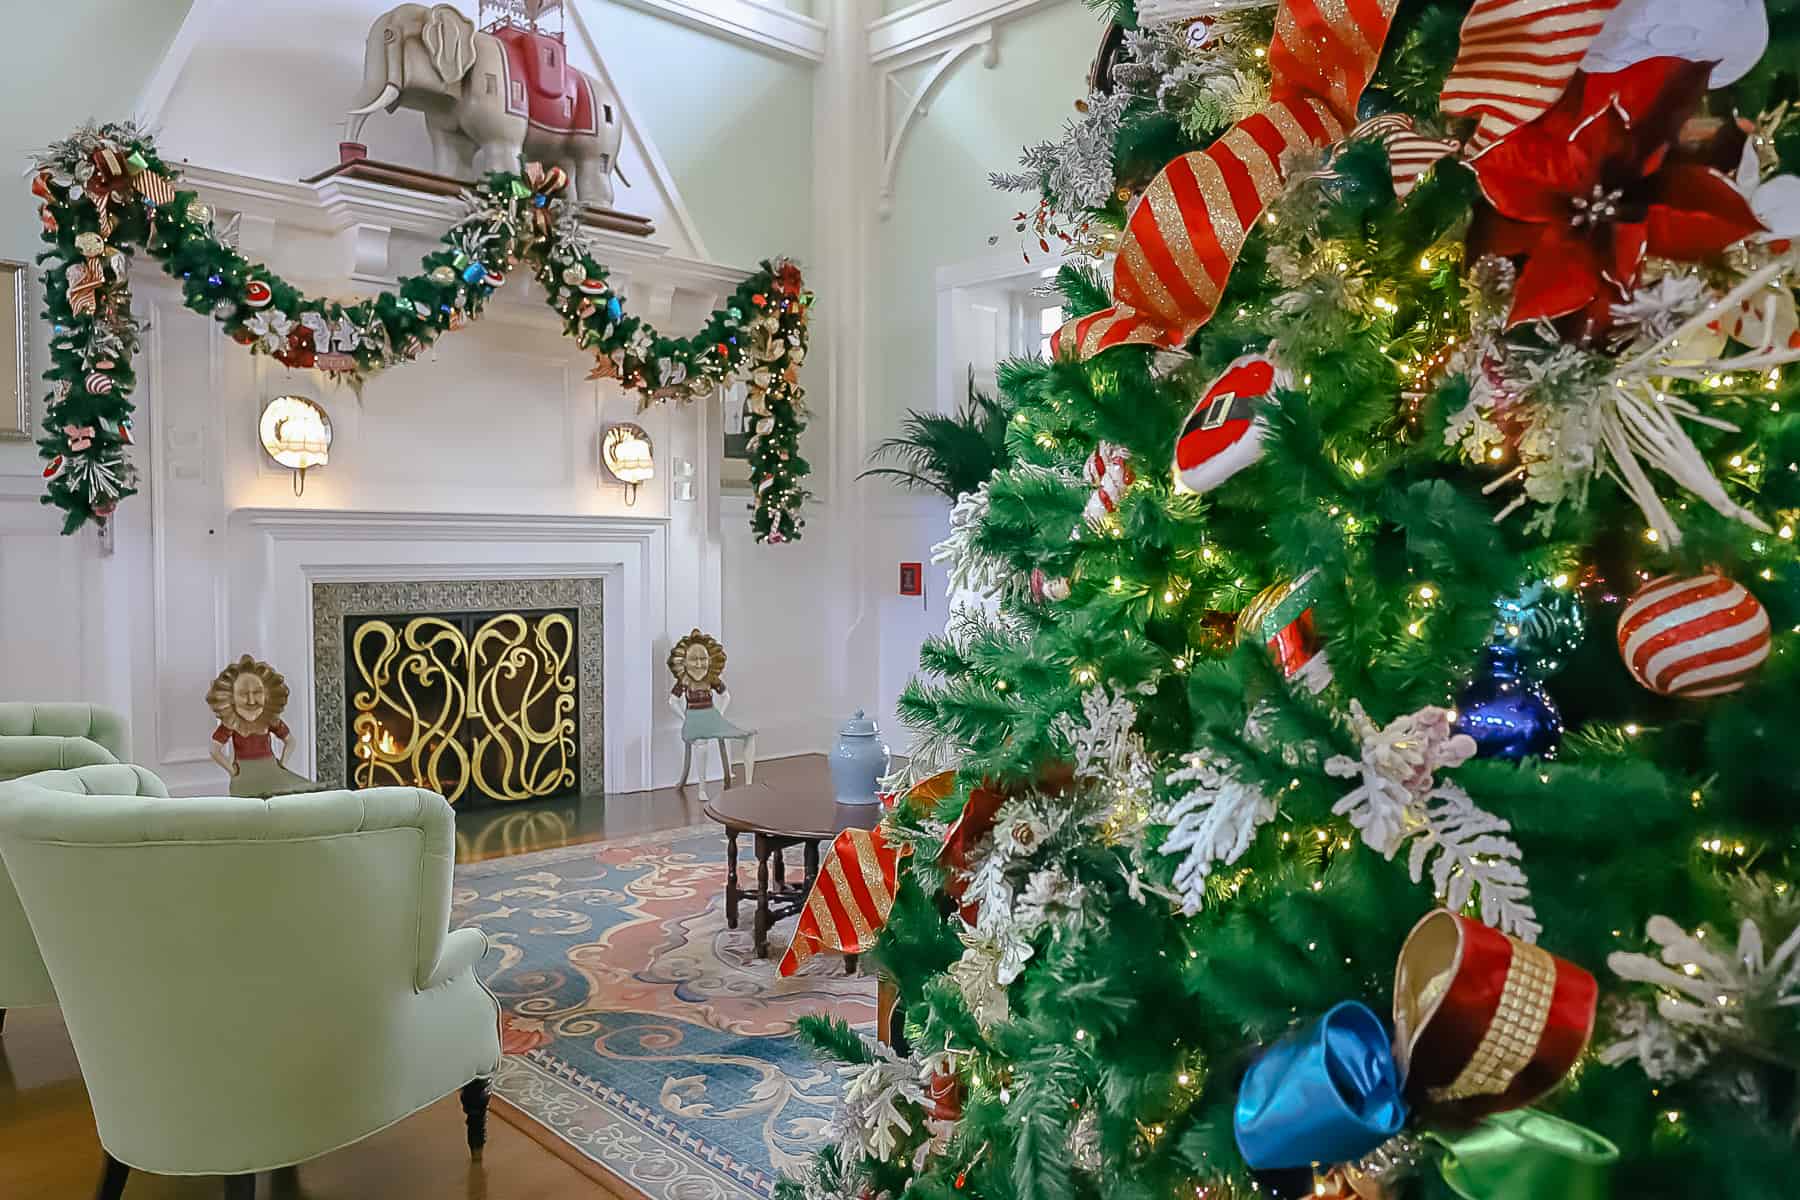 A sitting area in the lobby of Disney's Boardwalk Inn with the tree and garland. 